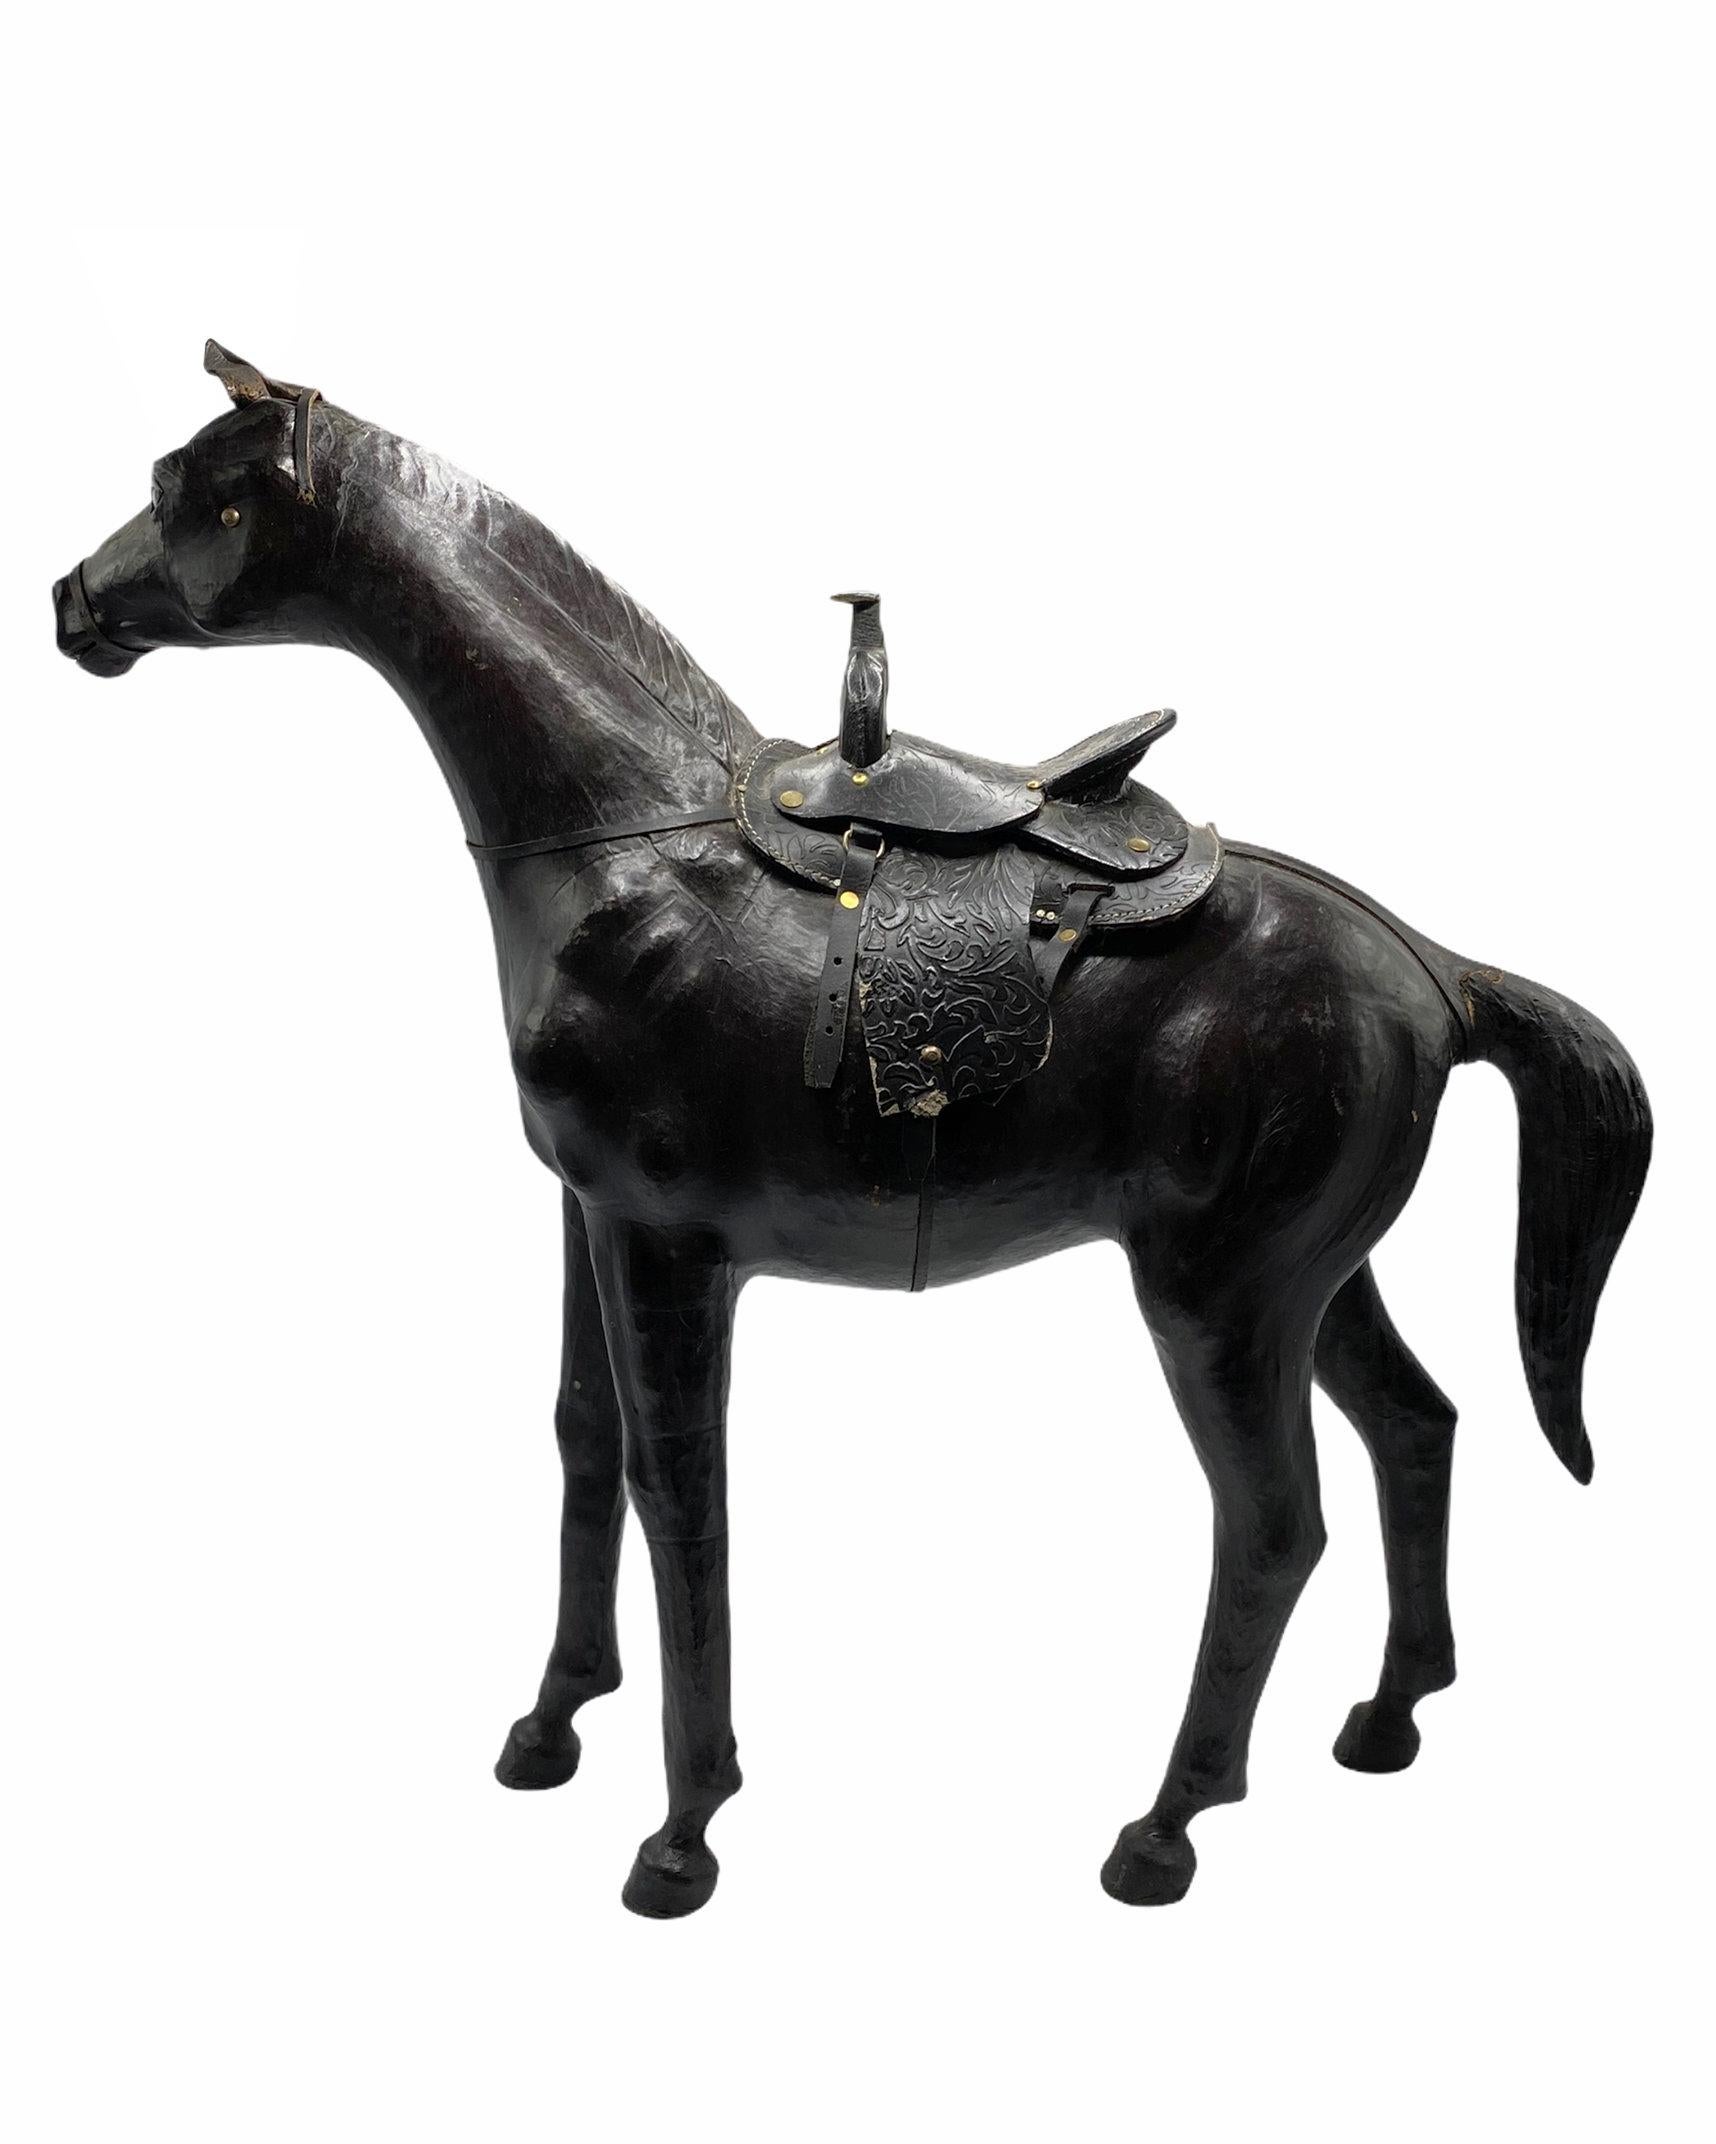 Vintage leather horse figurine embossed with very fine details.